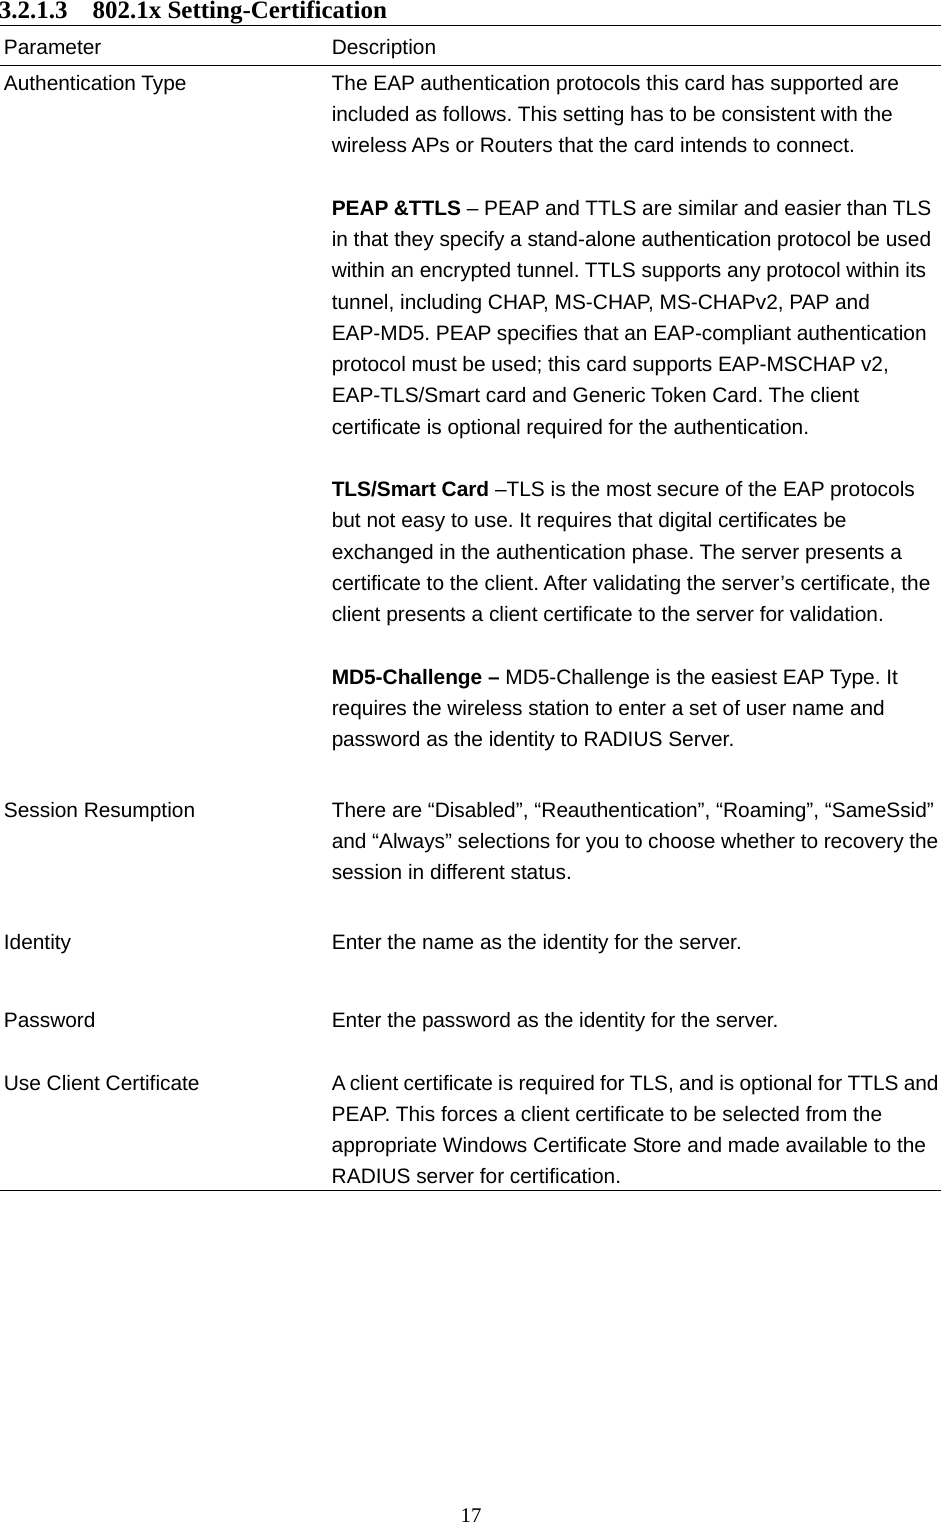  17 3.2.1.3  802.1x Setting-Certification Parameter Description Authentication Type  The EAP authentication protocols this card has supported are included as follows. This setting has to be consistent with the wireless APs or Routers that the card intends to connect.  PEAP &amp;TTLS – PEAP and TTLS are similar and easier than TLS in that they specify a stand-alone authentication protocol be used within an encrypted tunnel. TTLS supports any protocol within its tunnel, including CHAP, MS-CHAP, MS-CHAPv2, PAP and EAP-MD5. PEAP specifies that an EAP-compliant authentication protocol must be used; this card supports EAP-MSCHAP v2, EAP-TLS/Smart card and Generic Token Card. The client certificate is optional required for the authentication.  TLS/Smart Card –TLS is the most secure of the EAP protocols but not easy to use. It requires that digital certificates be exchanged in the authentication phase. The server presents a certificate to the client. After validating the server’s certificate, the client presents a client certificate to the server for validation.    MD5-Challenge – MD5-Challenge is the easiest EAP Type. It requires the wireless station to enter a set of user name and password as the identity to RADIUS Server.   Session Resumption  There are “Disabled”, “Reauthentication”, “Roaming”, “SameSsid” and “Always” selections for you to choose whether to recovery the session in different status.   Identity  Enter the name as the identity for the server.   Password  Enter the password as the identity for the server. Use Client Certificate A client certificate is required for TLS, and is optional for TTLS and PEAP. This forces a client certificate to be selected from the appropriate Windows Certificate Store and made available to the RADIUS server for certification.          